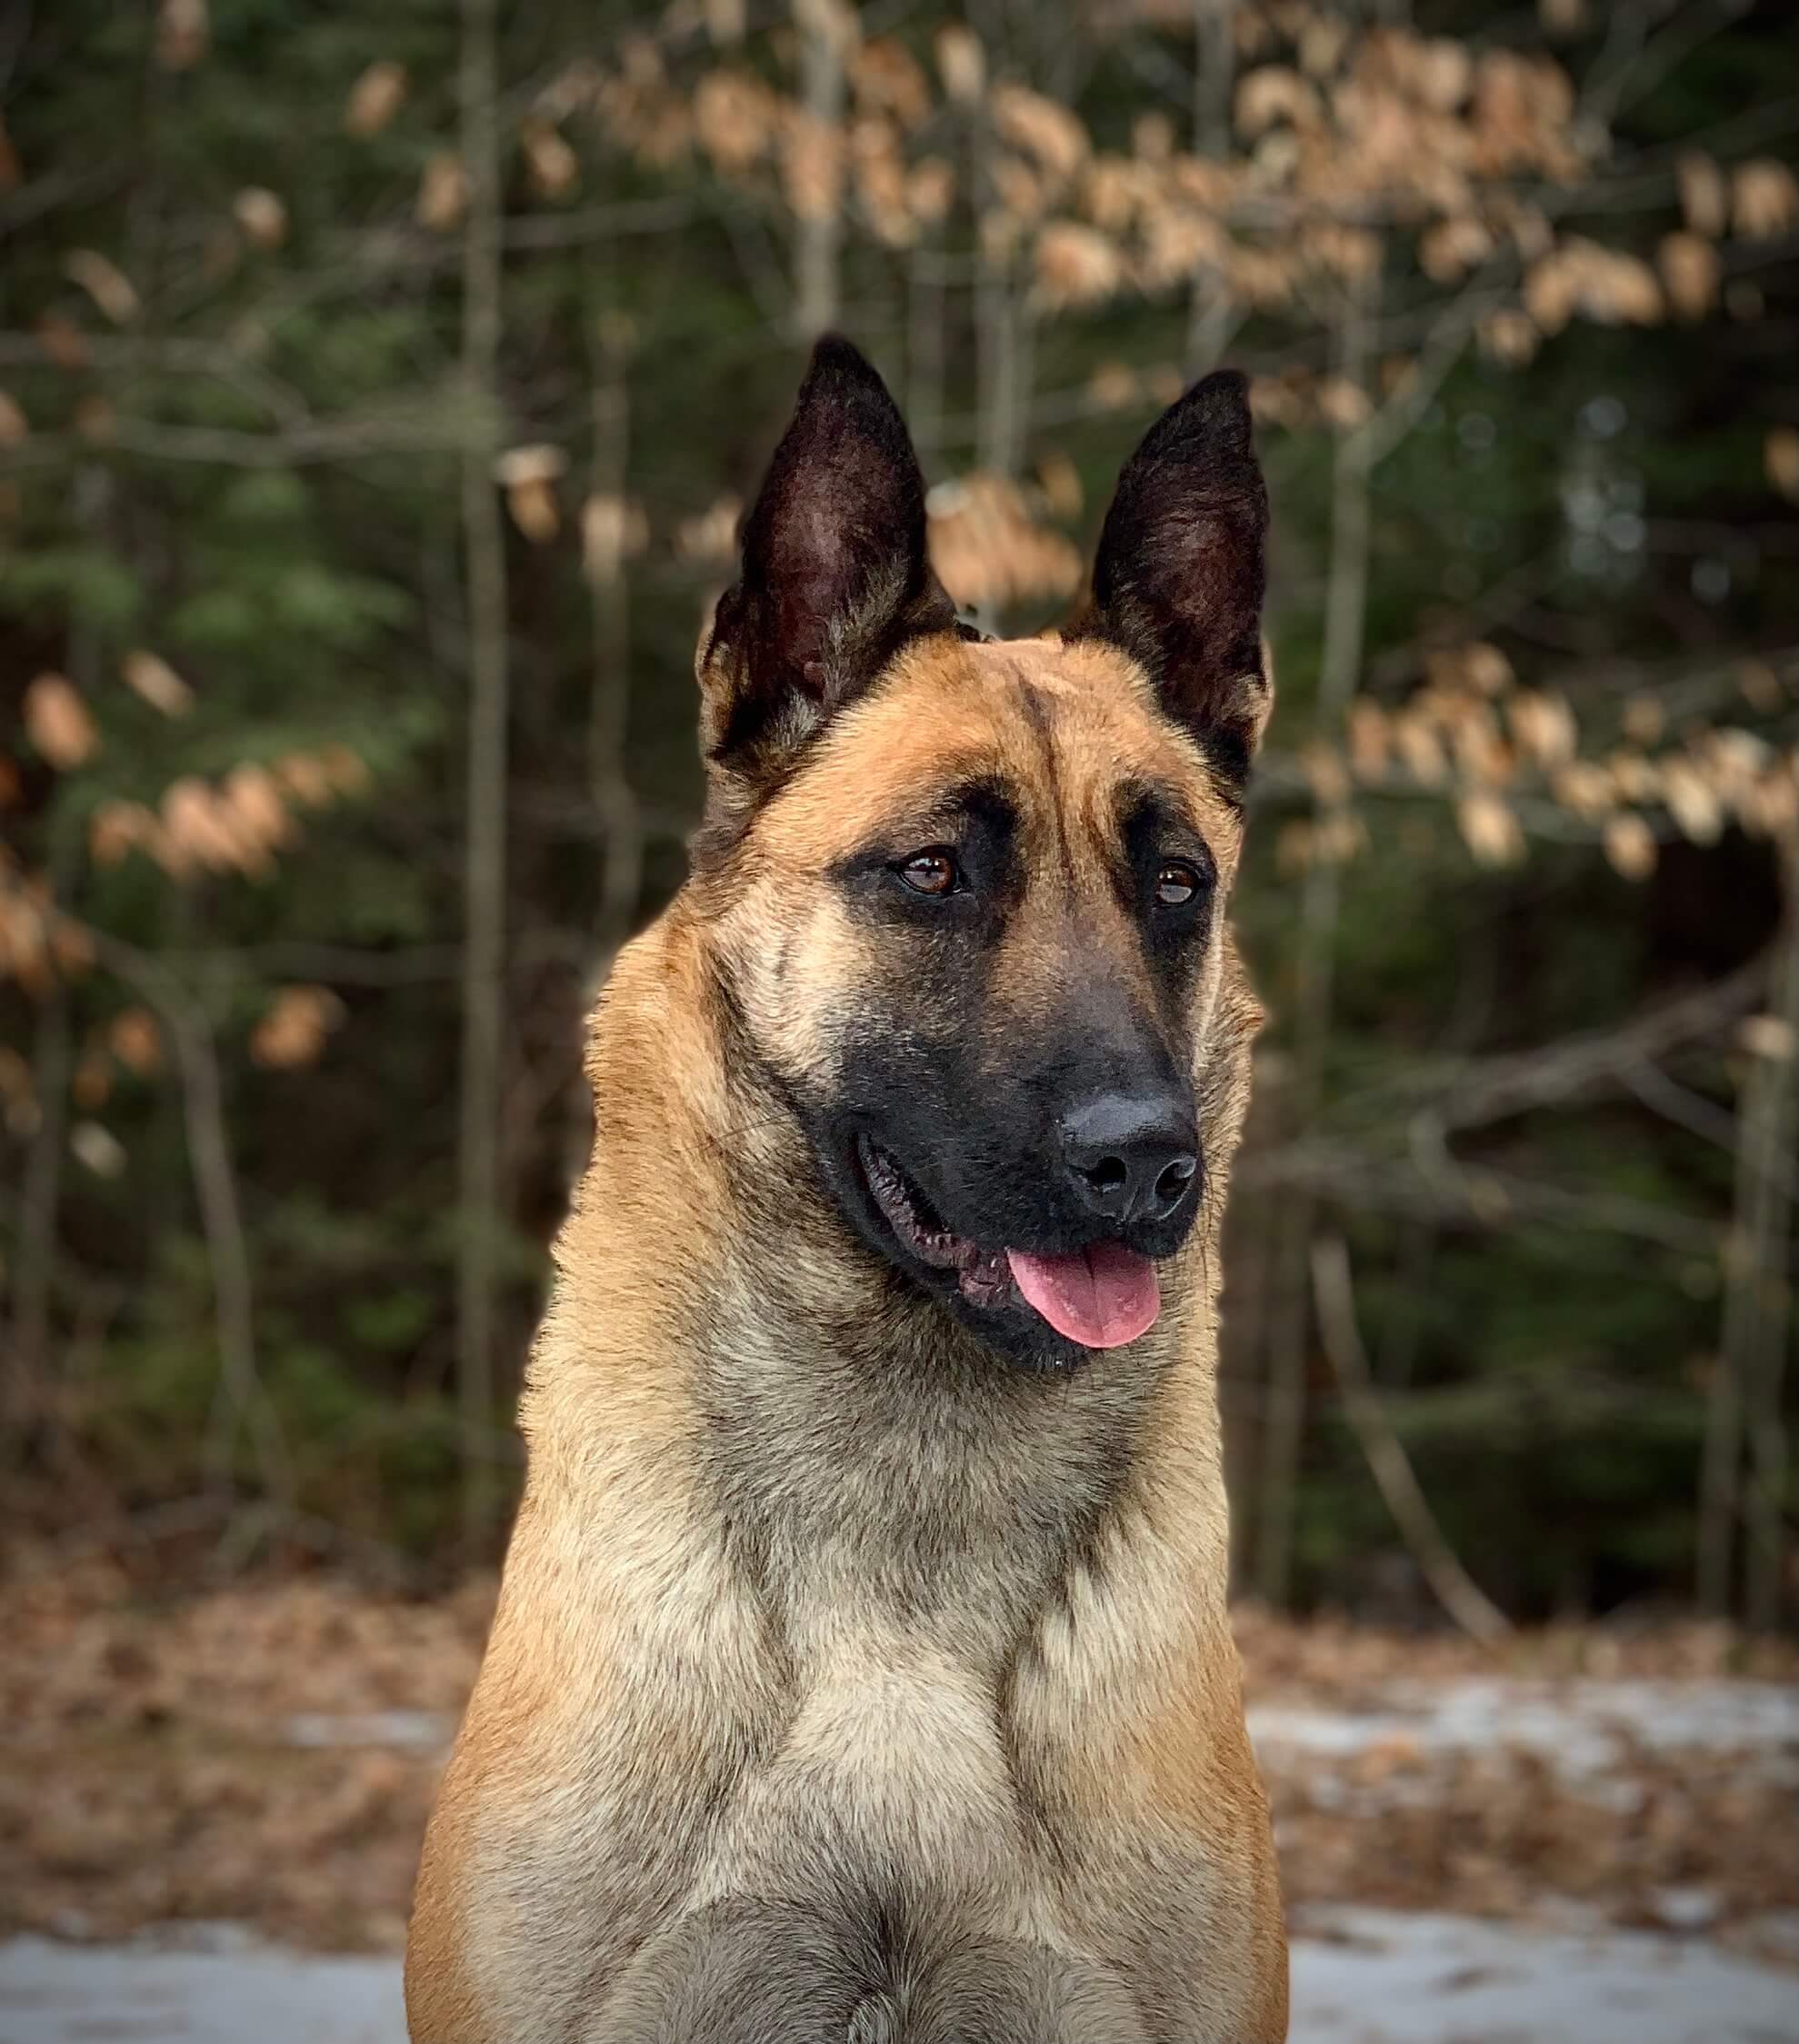 Protection dog posing in front of a forest